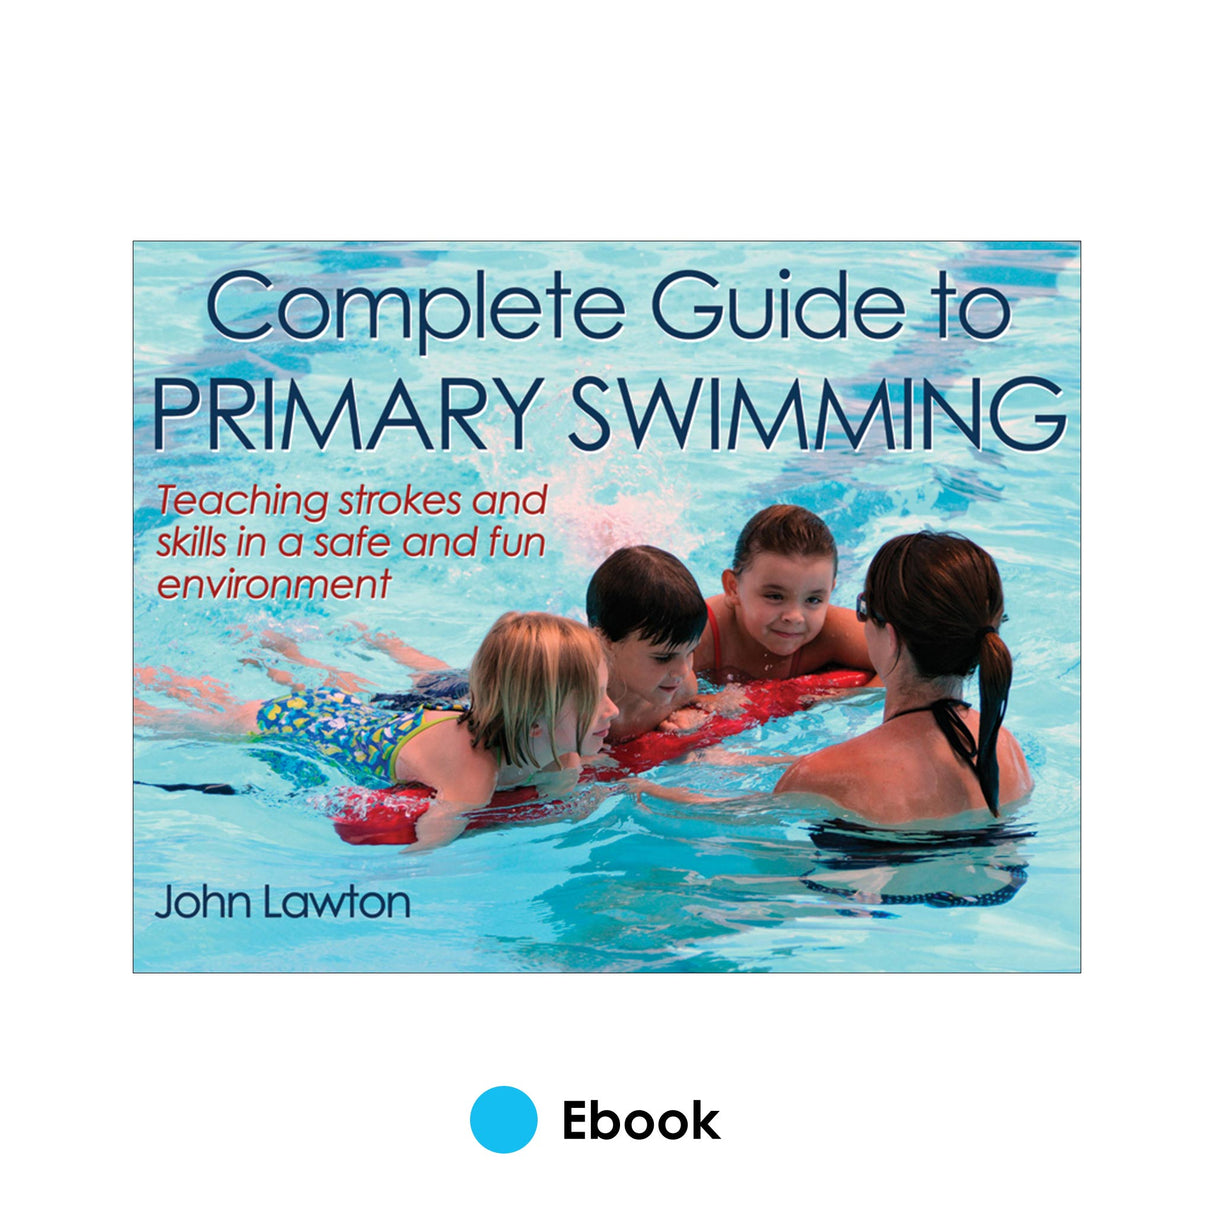 Complete Guide to Primary Swimming PDF